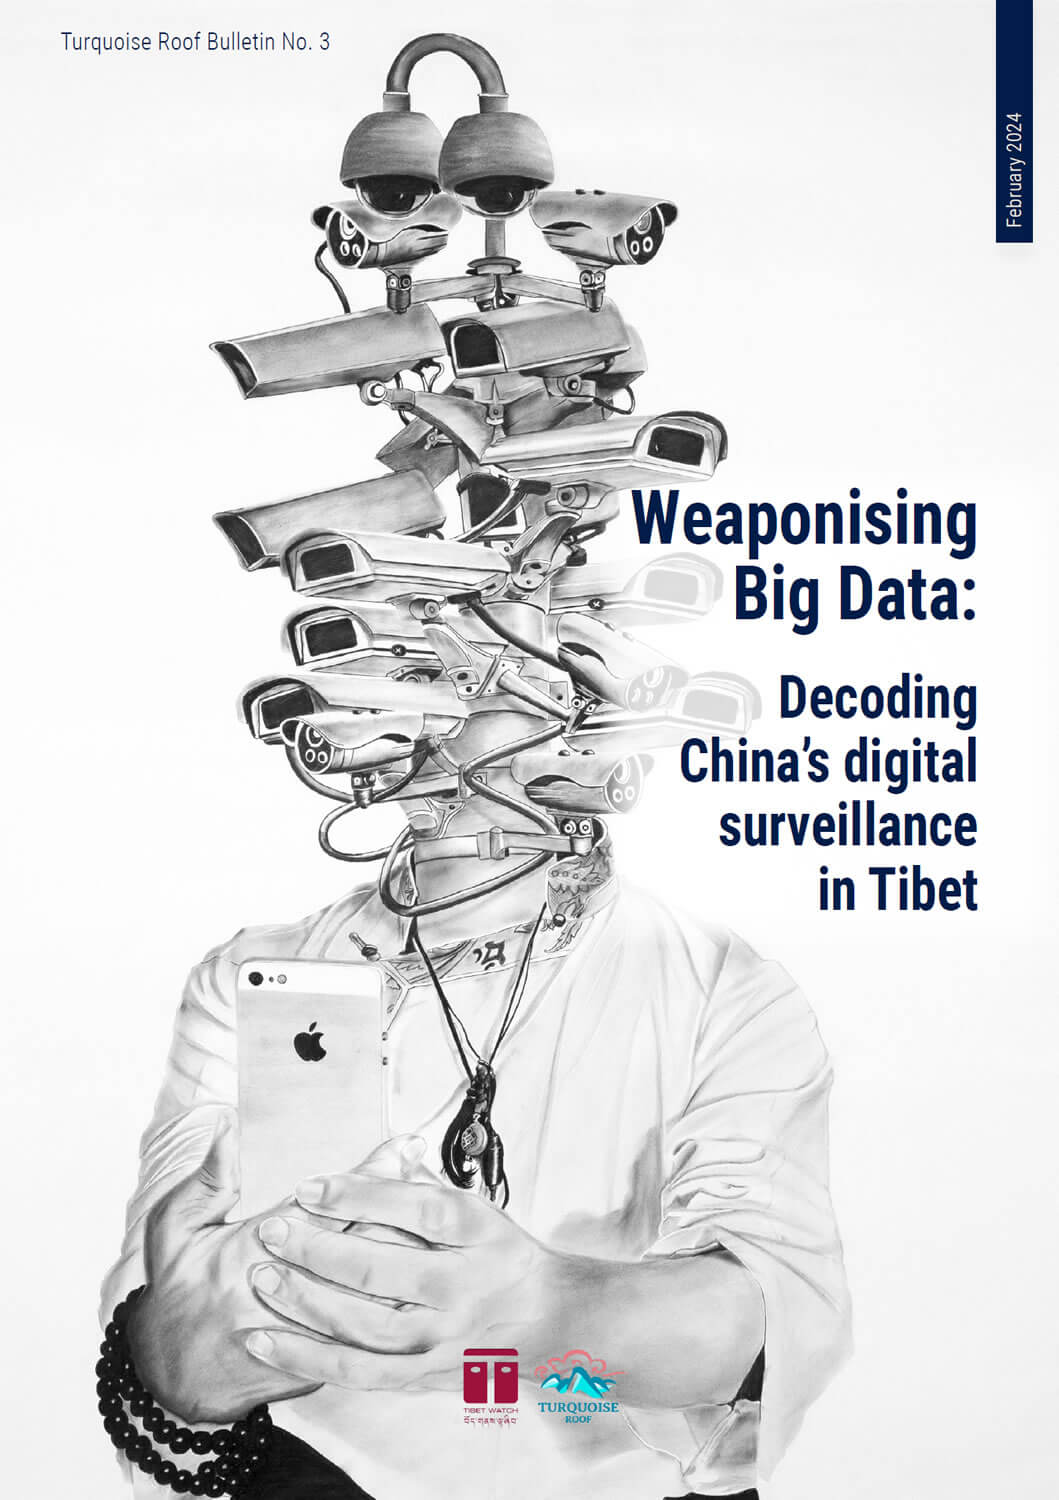 Rewording the text:

Using data analysis to create weapons: Understanding China's use of digital surveillance in Tibet.